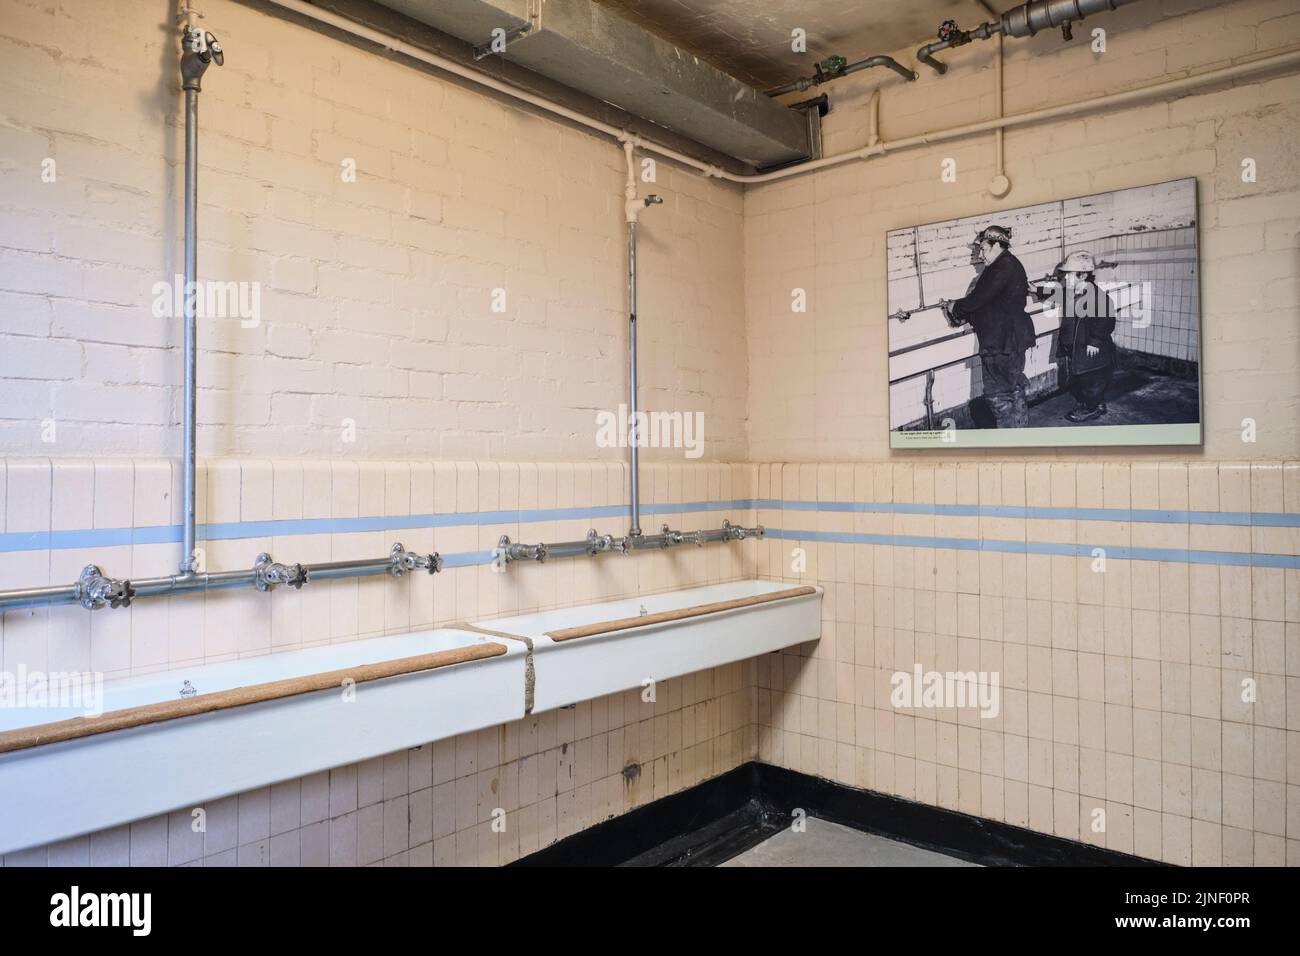 Big, communal, trough tiled sinks, for miners to use for washing hands, arms before entering the locker, changing area. At the Big Pit National Coal M Stock Photo